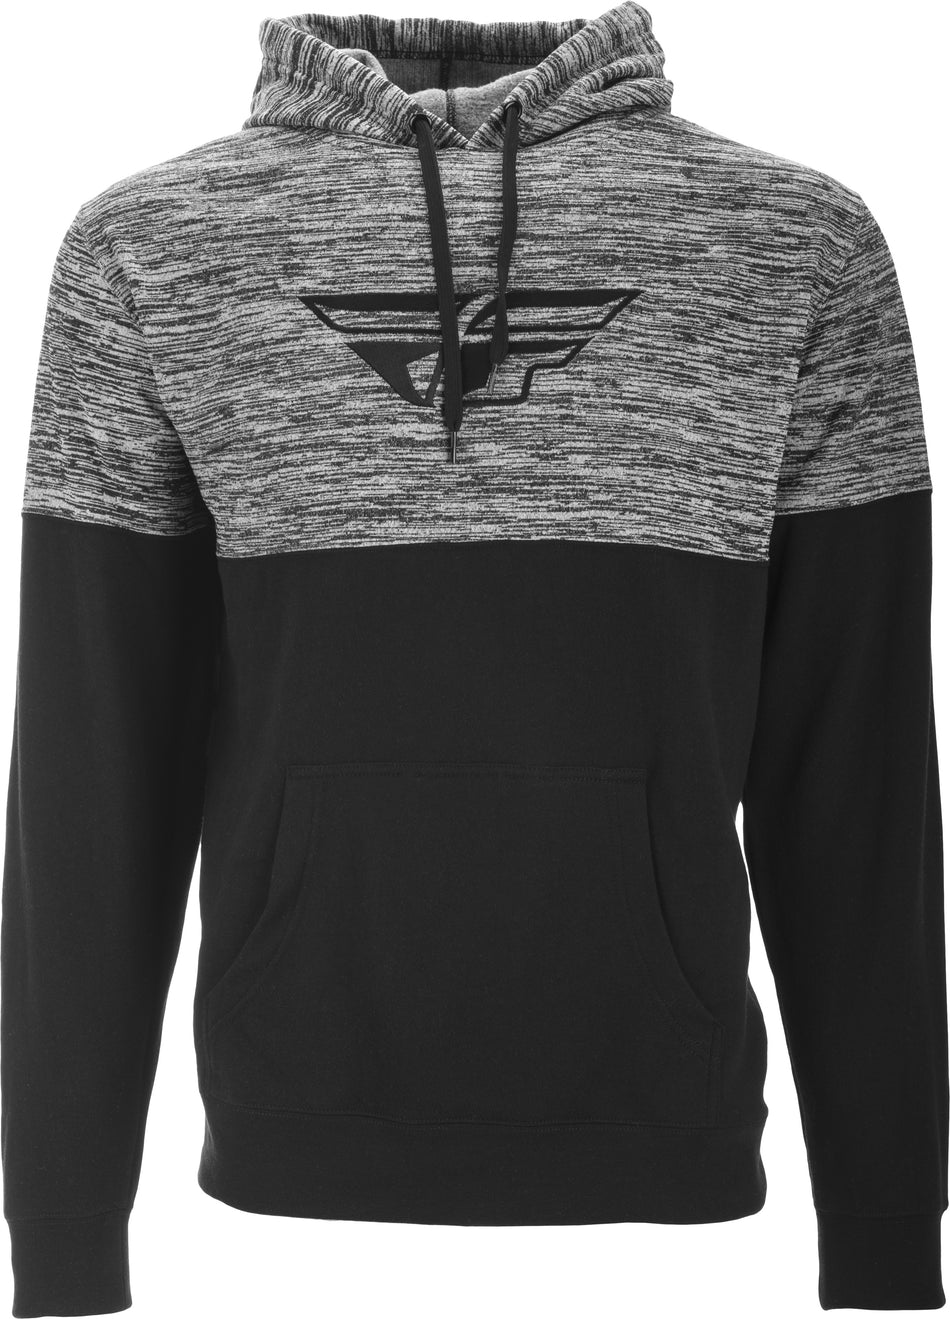 FLY RACING Fly F-Wing Pullover Hoodie Black Noise Xl 354-0228X